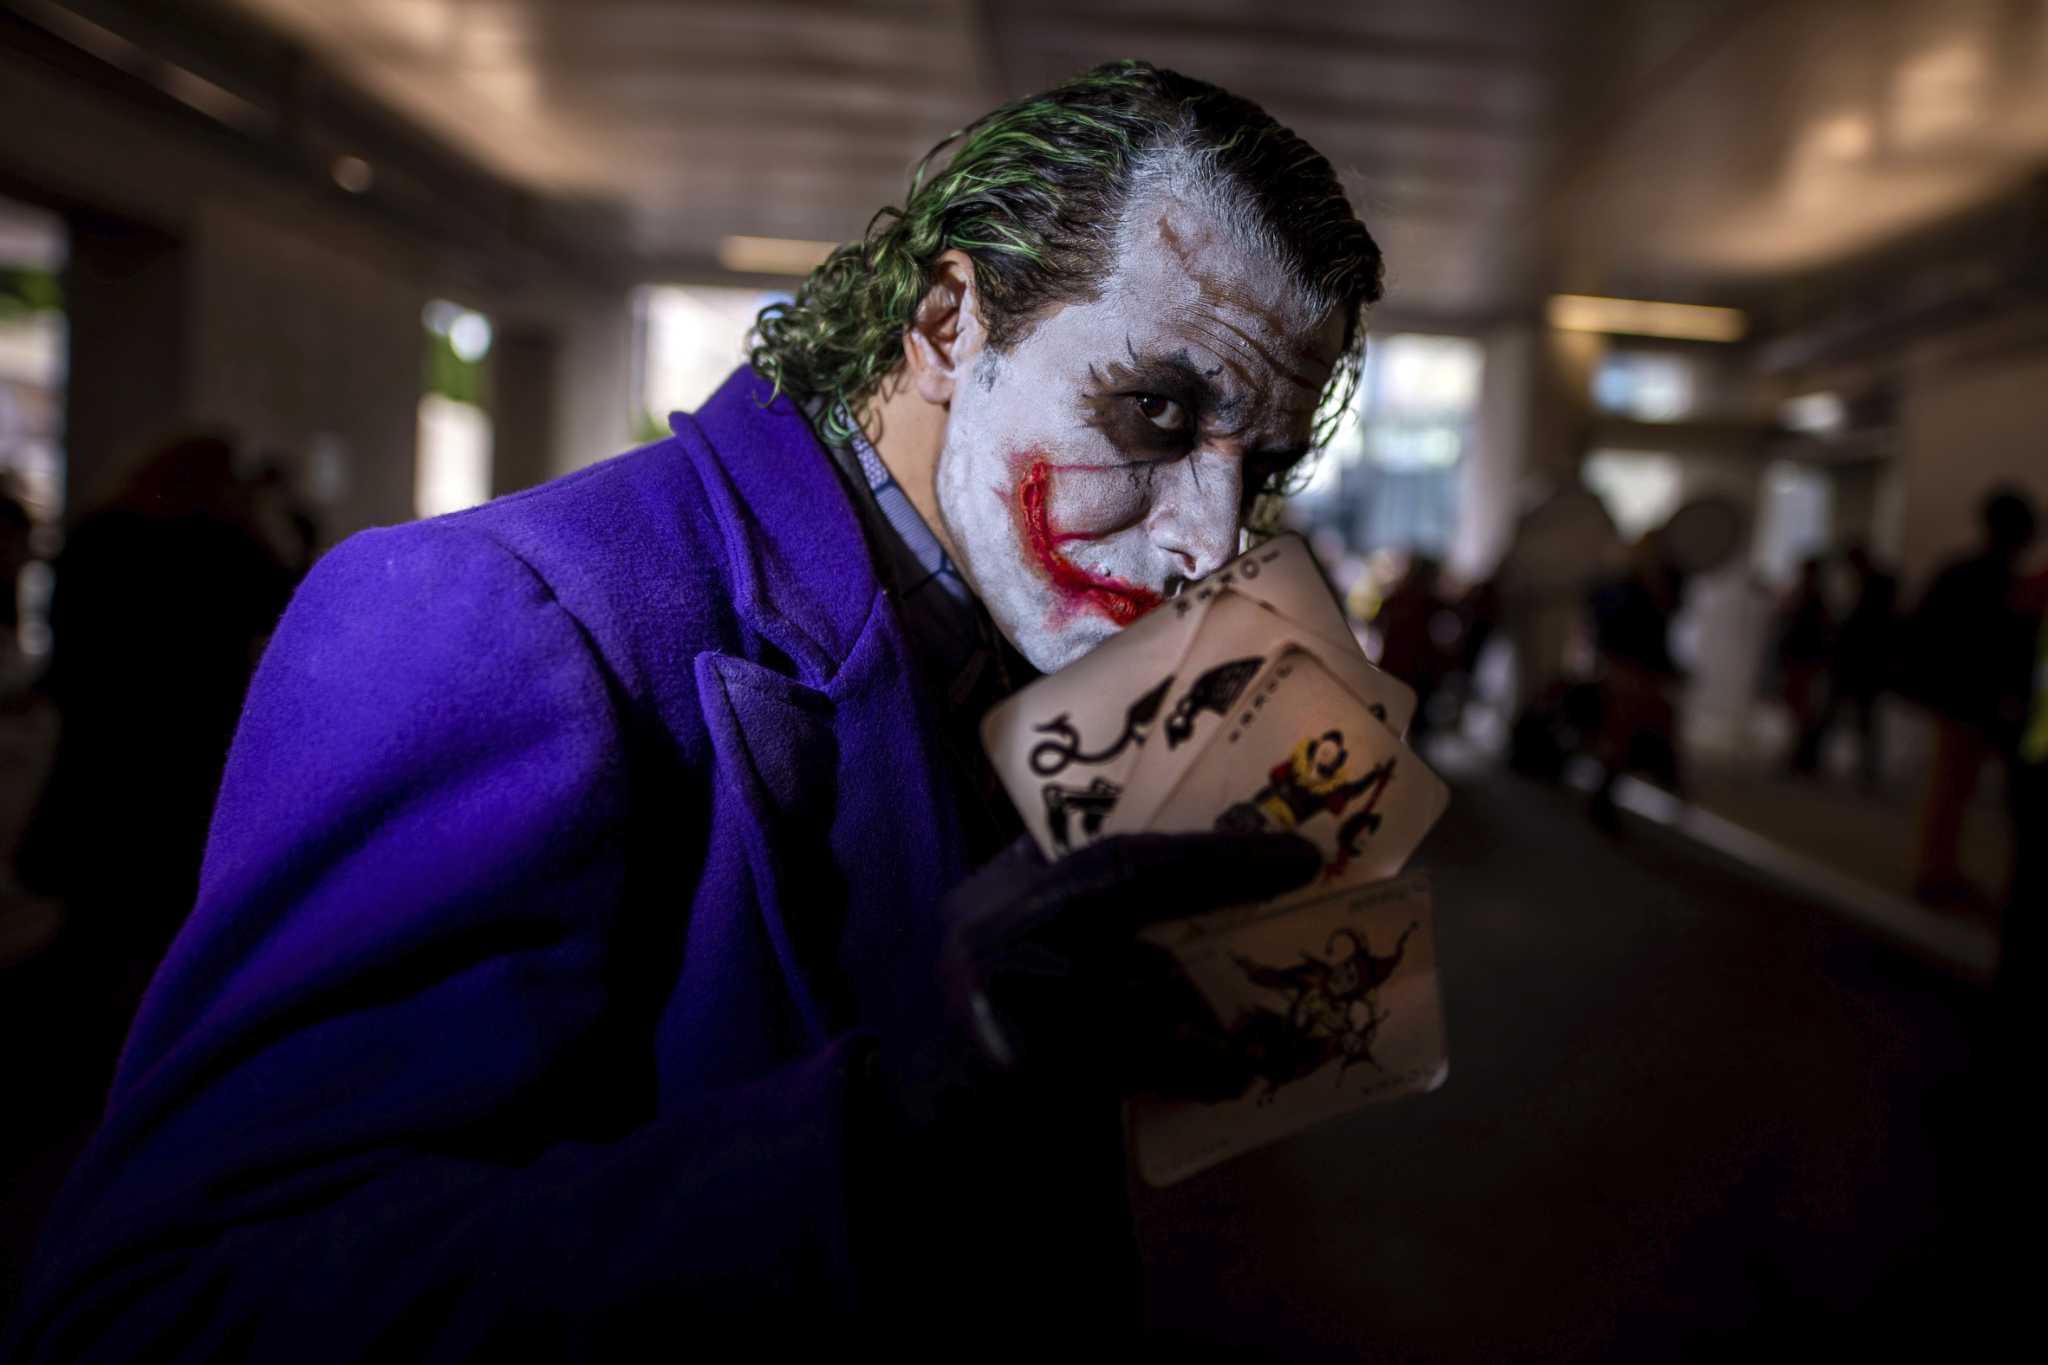 Joker' movie  leads The theaters with controversy and with extra security- Here's everything you should know